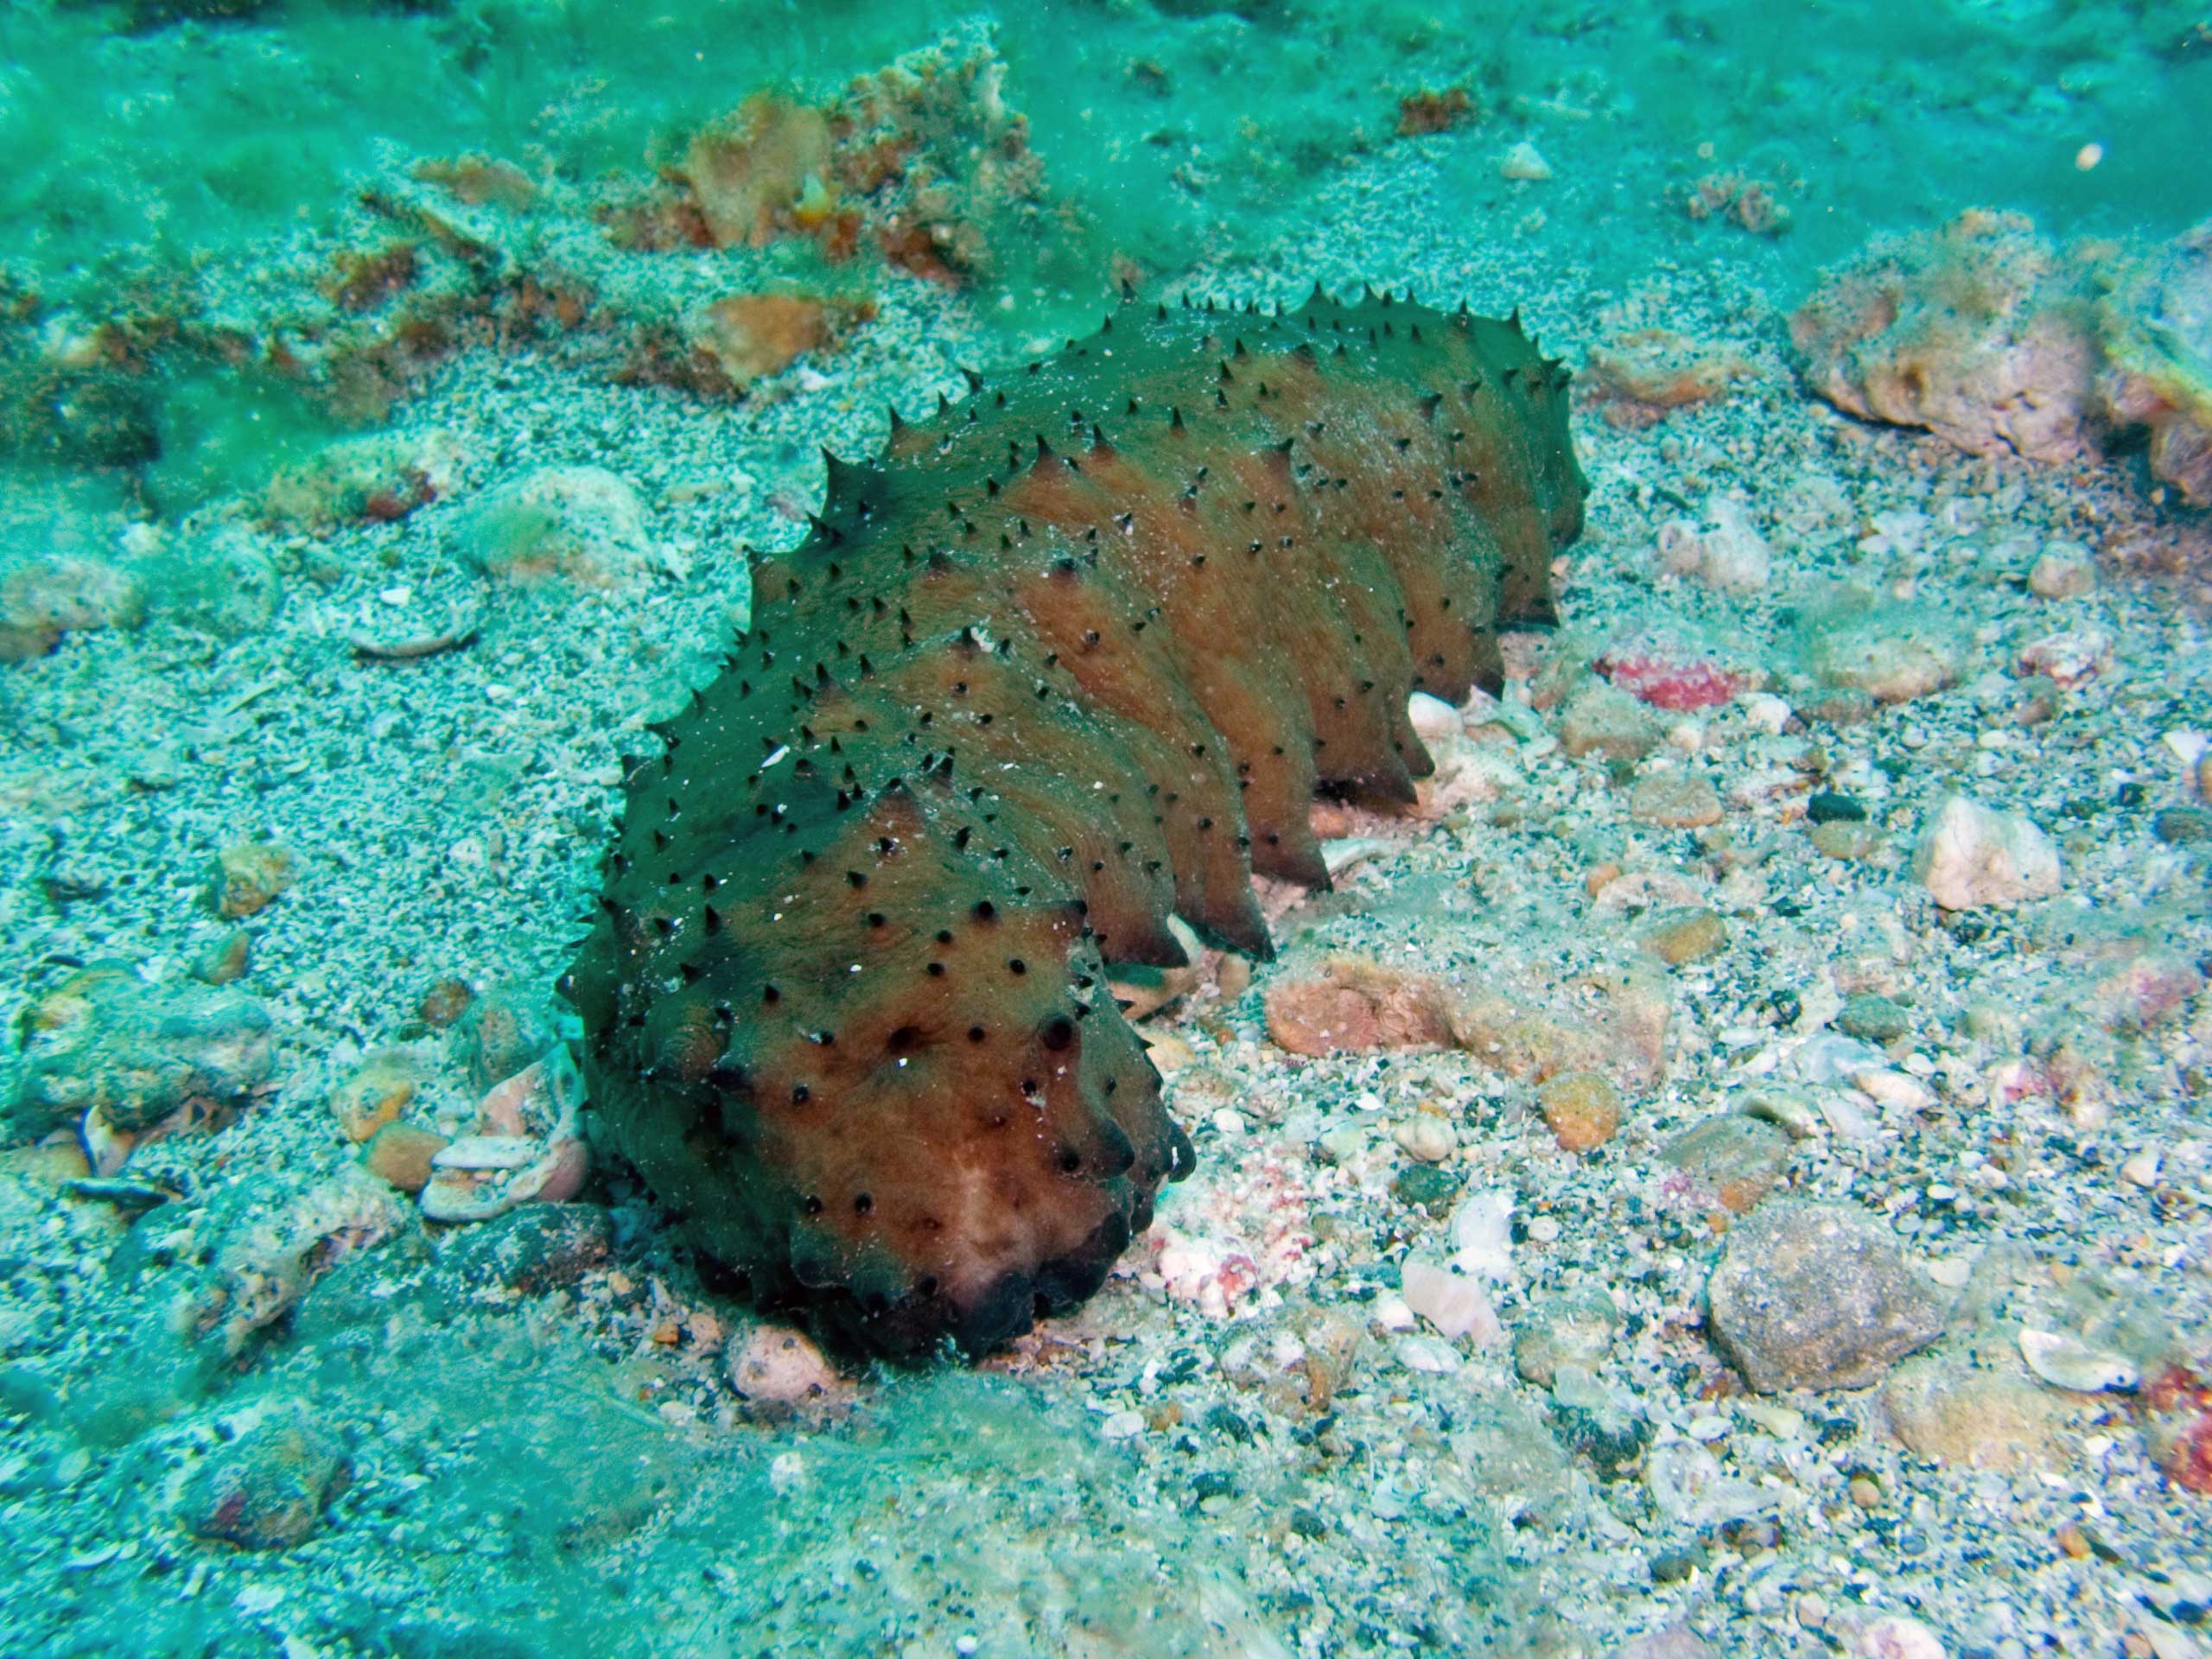 Pinellas county Florida reef system Army Tank  - Sea Cucumber 4/2006